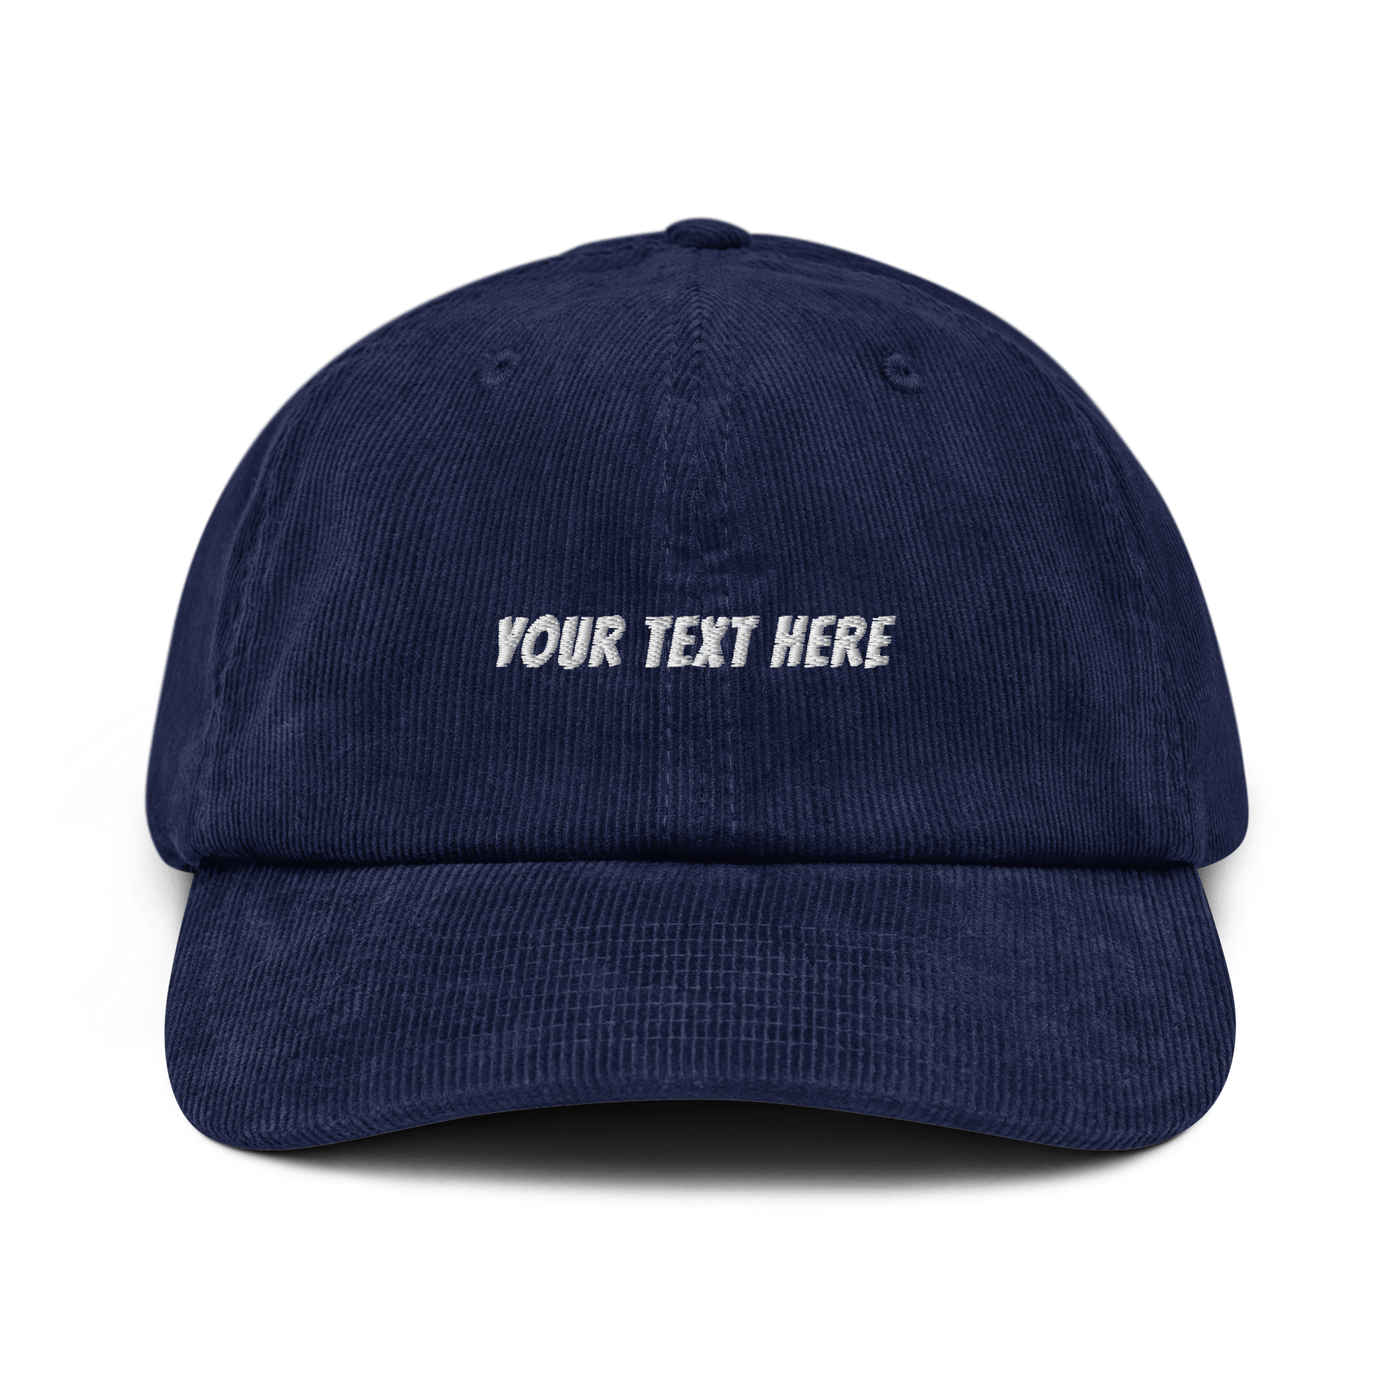 Customize Your Own Corduroy hat - Banger Font - Oxford Navy - - Just Another Cap Store